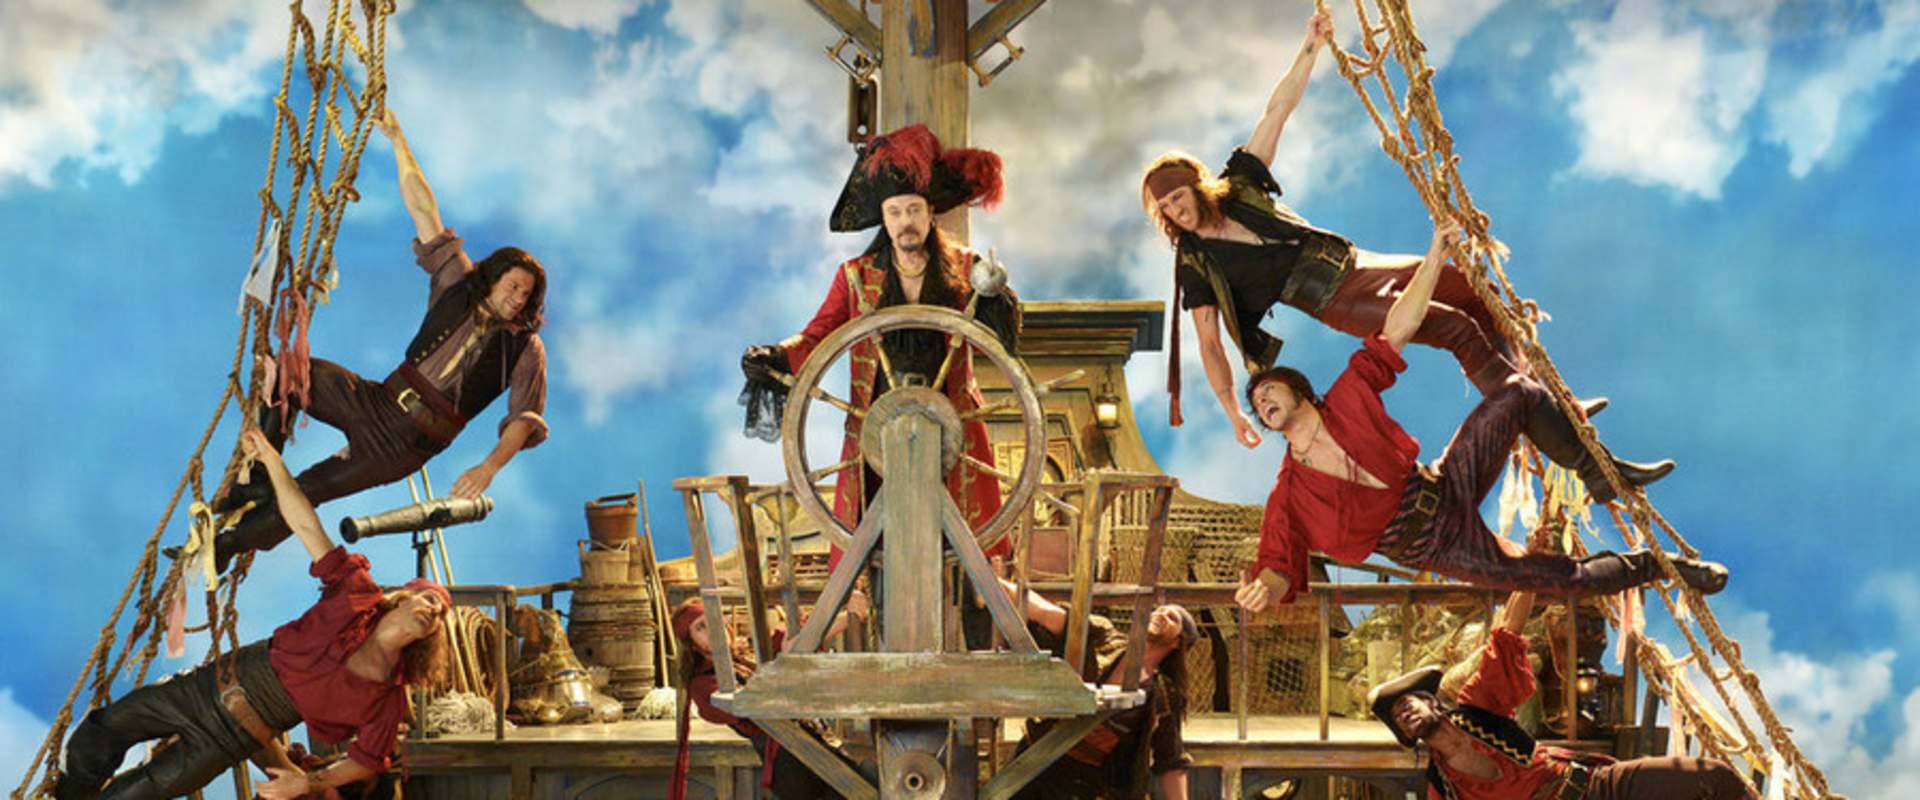 Peter Pan Live! background 1